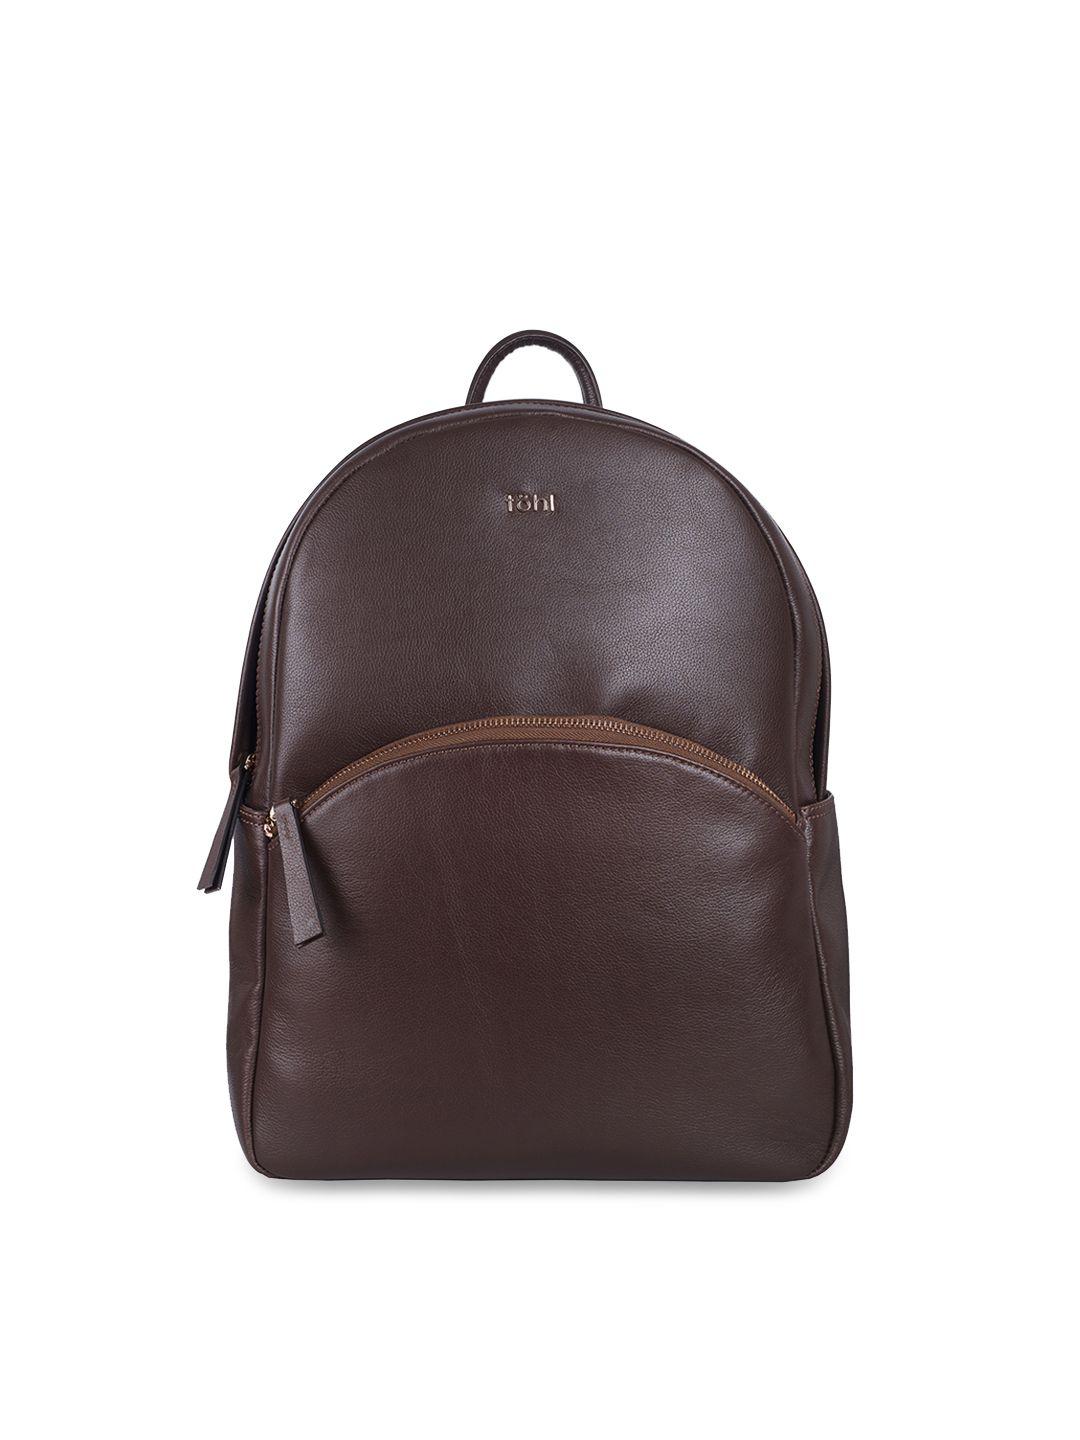 tohl women brown textured backpack